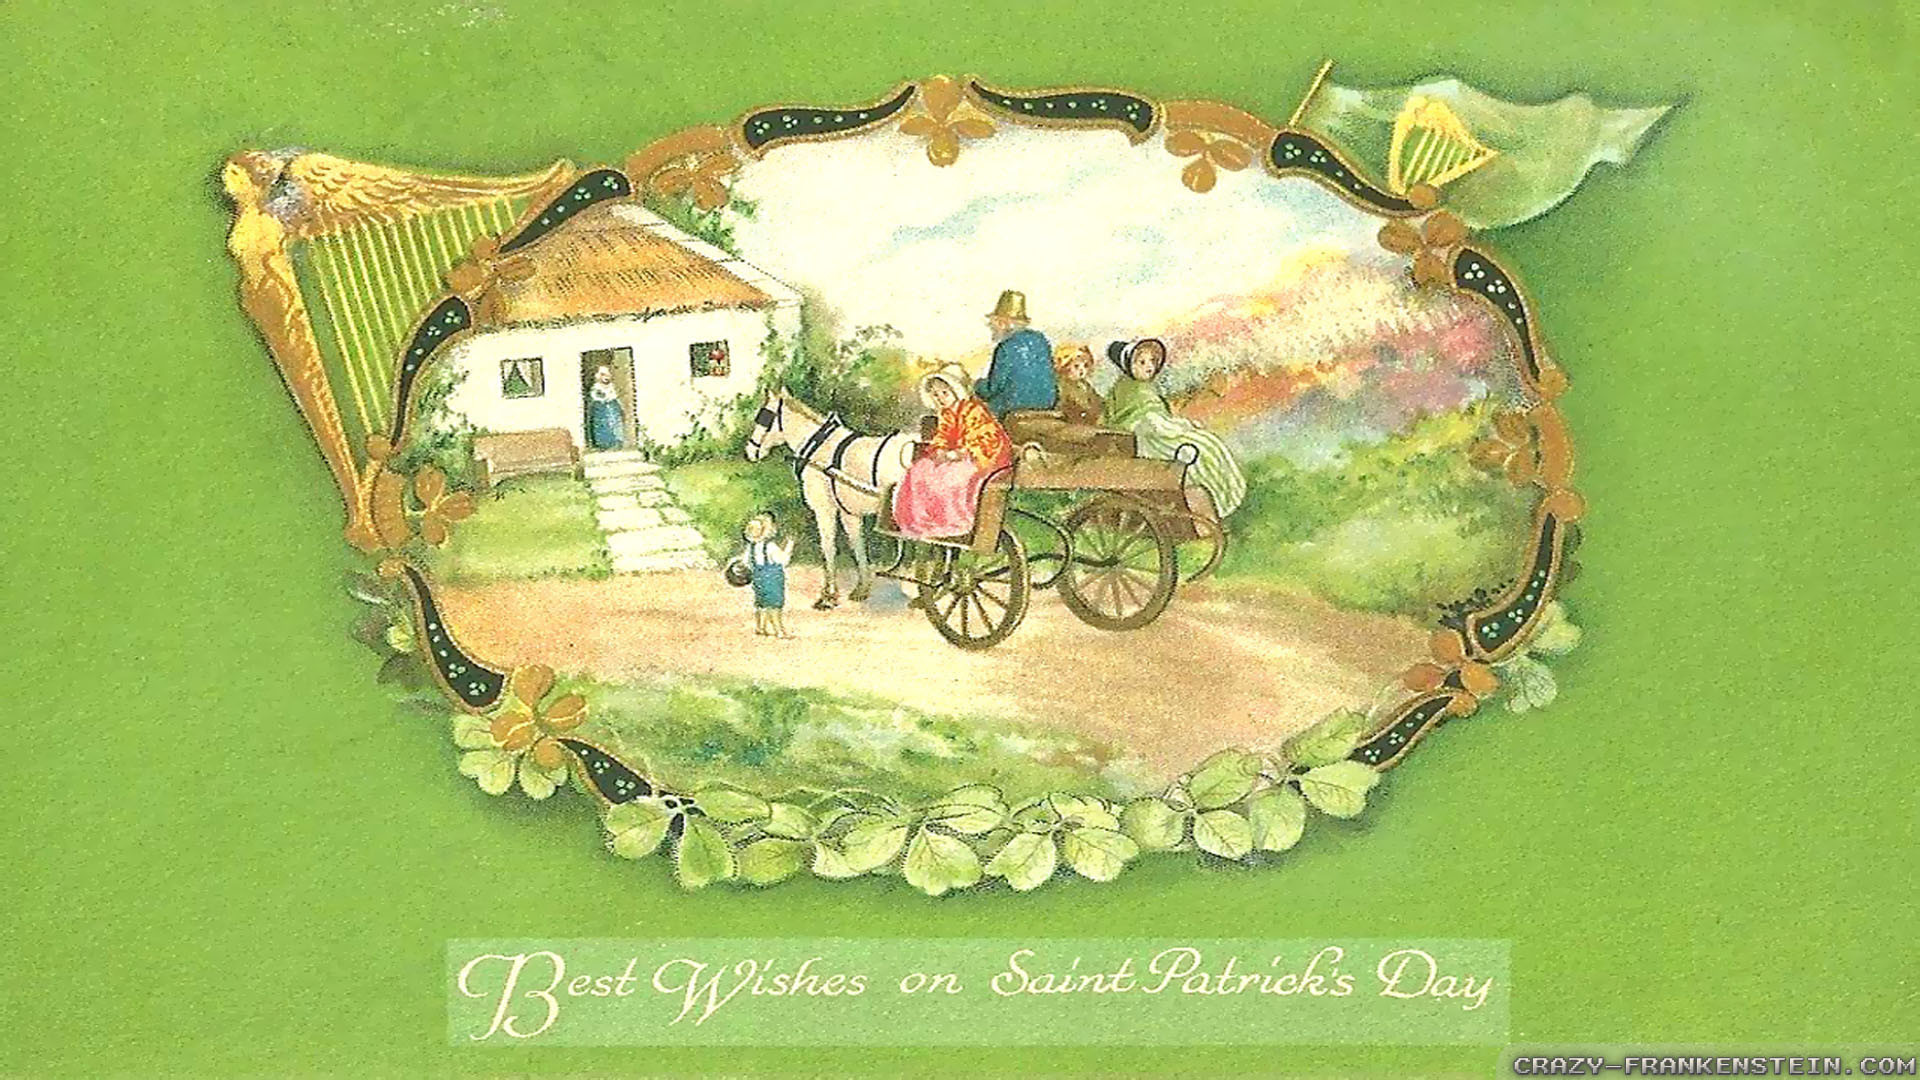 1920x1080 Wallpaper: Vintage Saint Patricks day cards wallpapers. Resolution:  1024x768 | 1280x1024 | 1600x1200. Widescreen Res: 1440x900 | 1680x1050 |  1920x1200